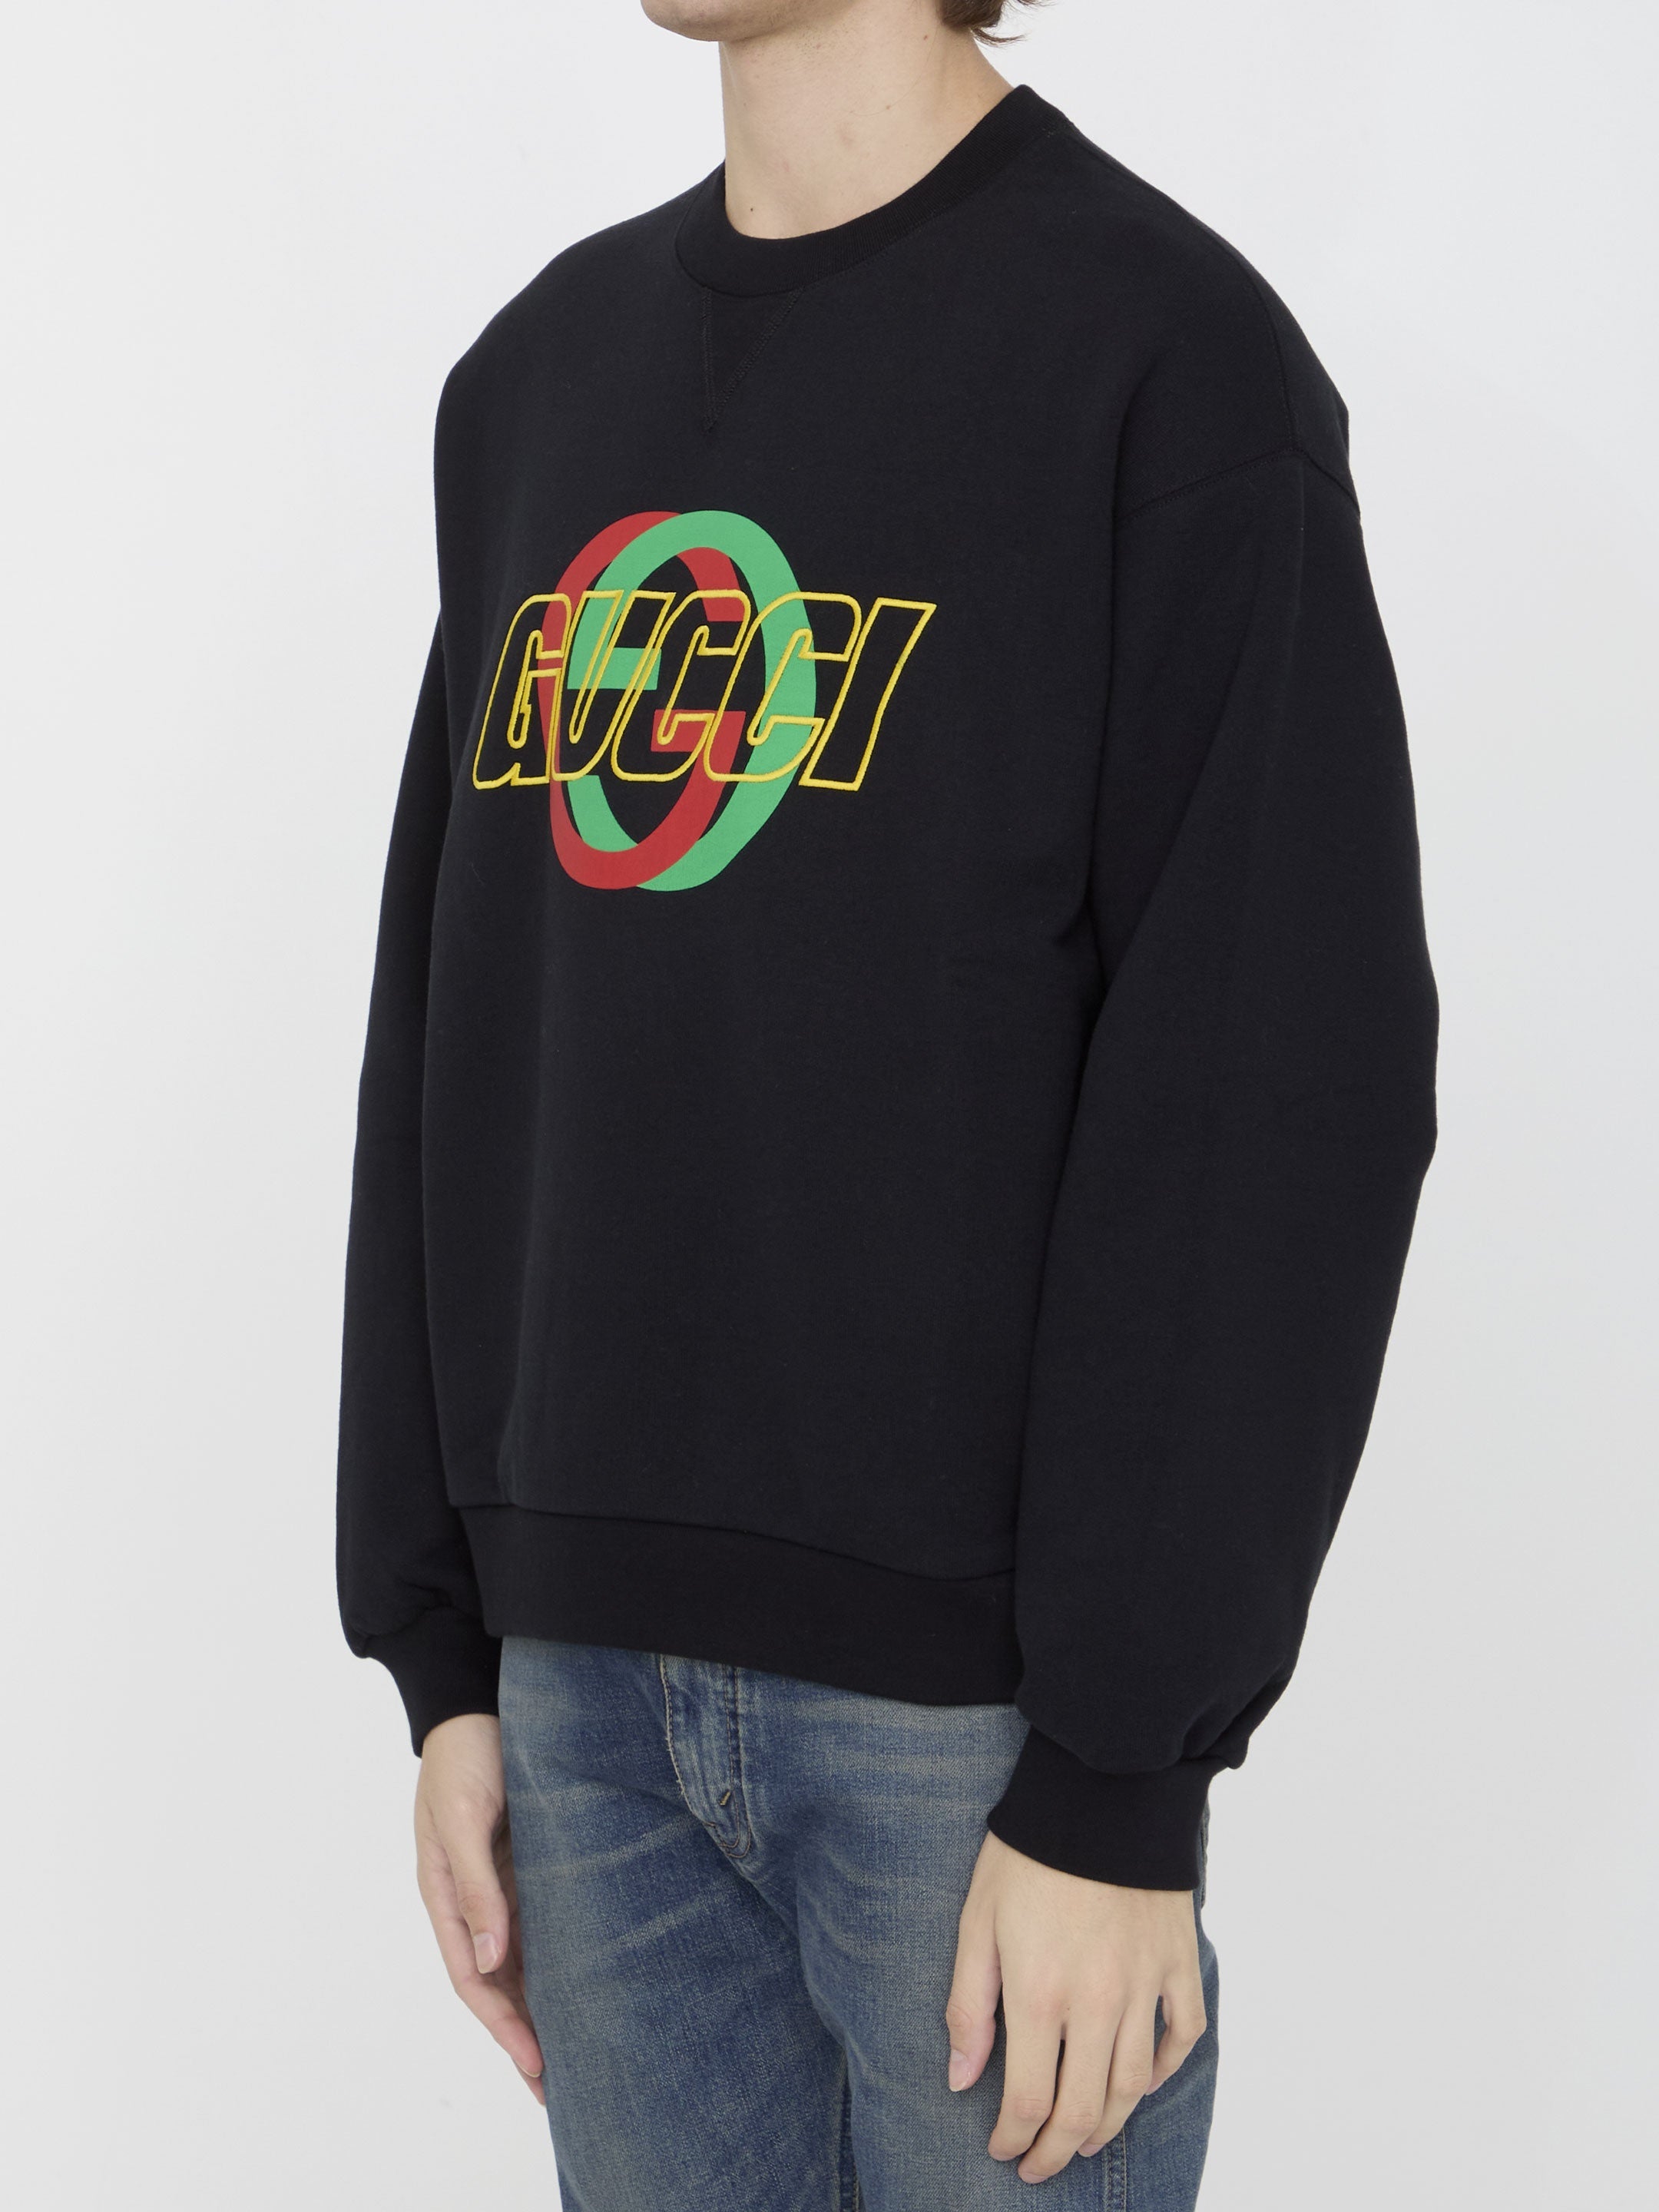 GUCCI-OUTLET-SALE-Gucci-sweatshirt-Strick-ARCHIVE-COLLECTION-2.jpg